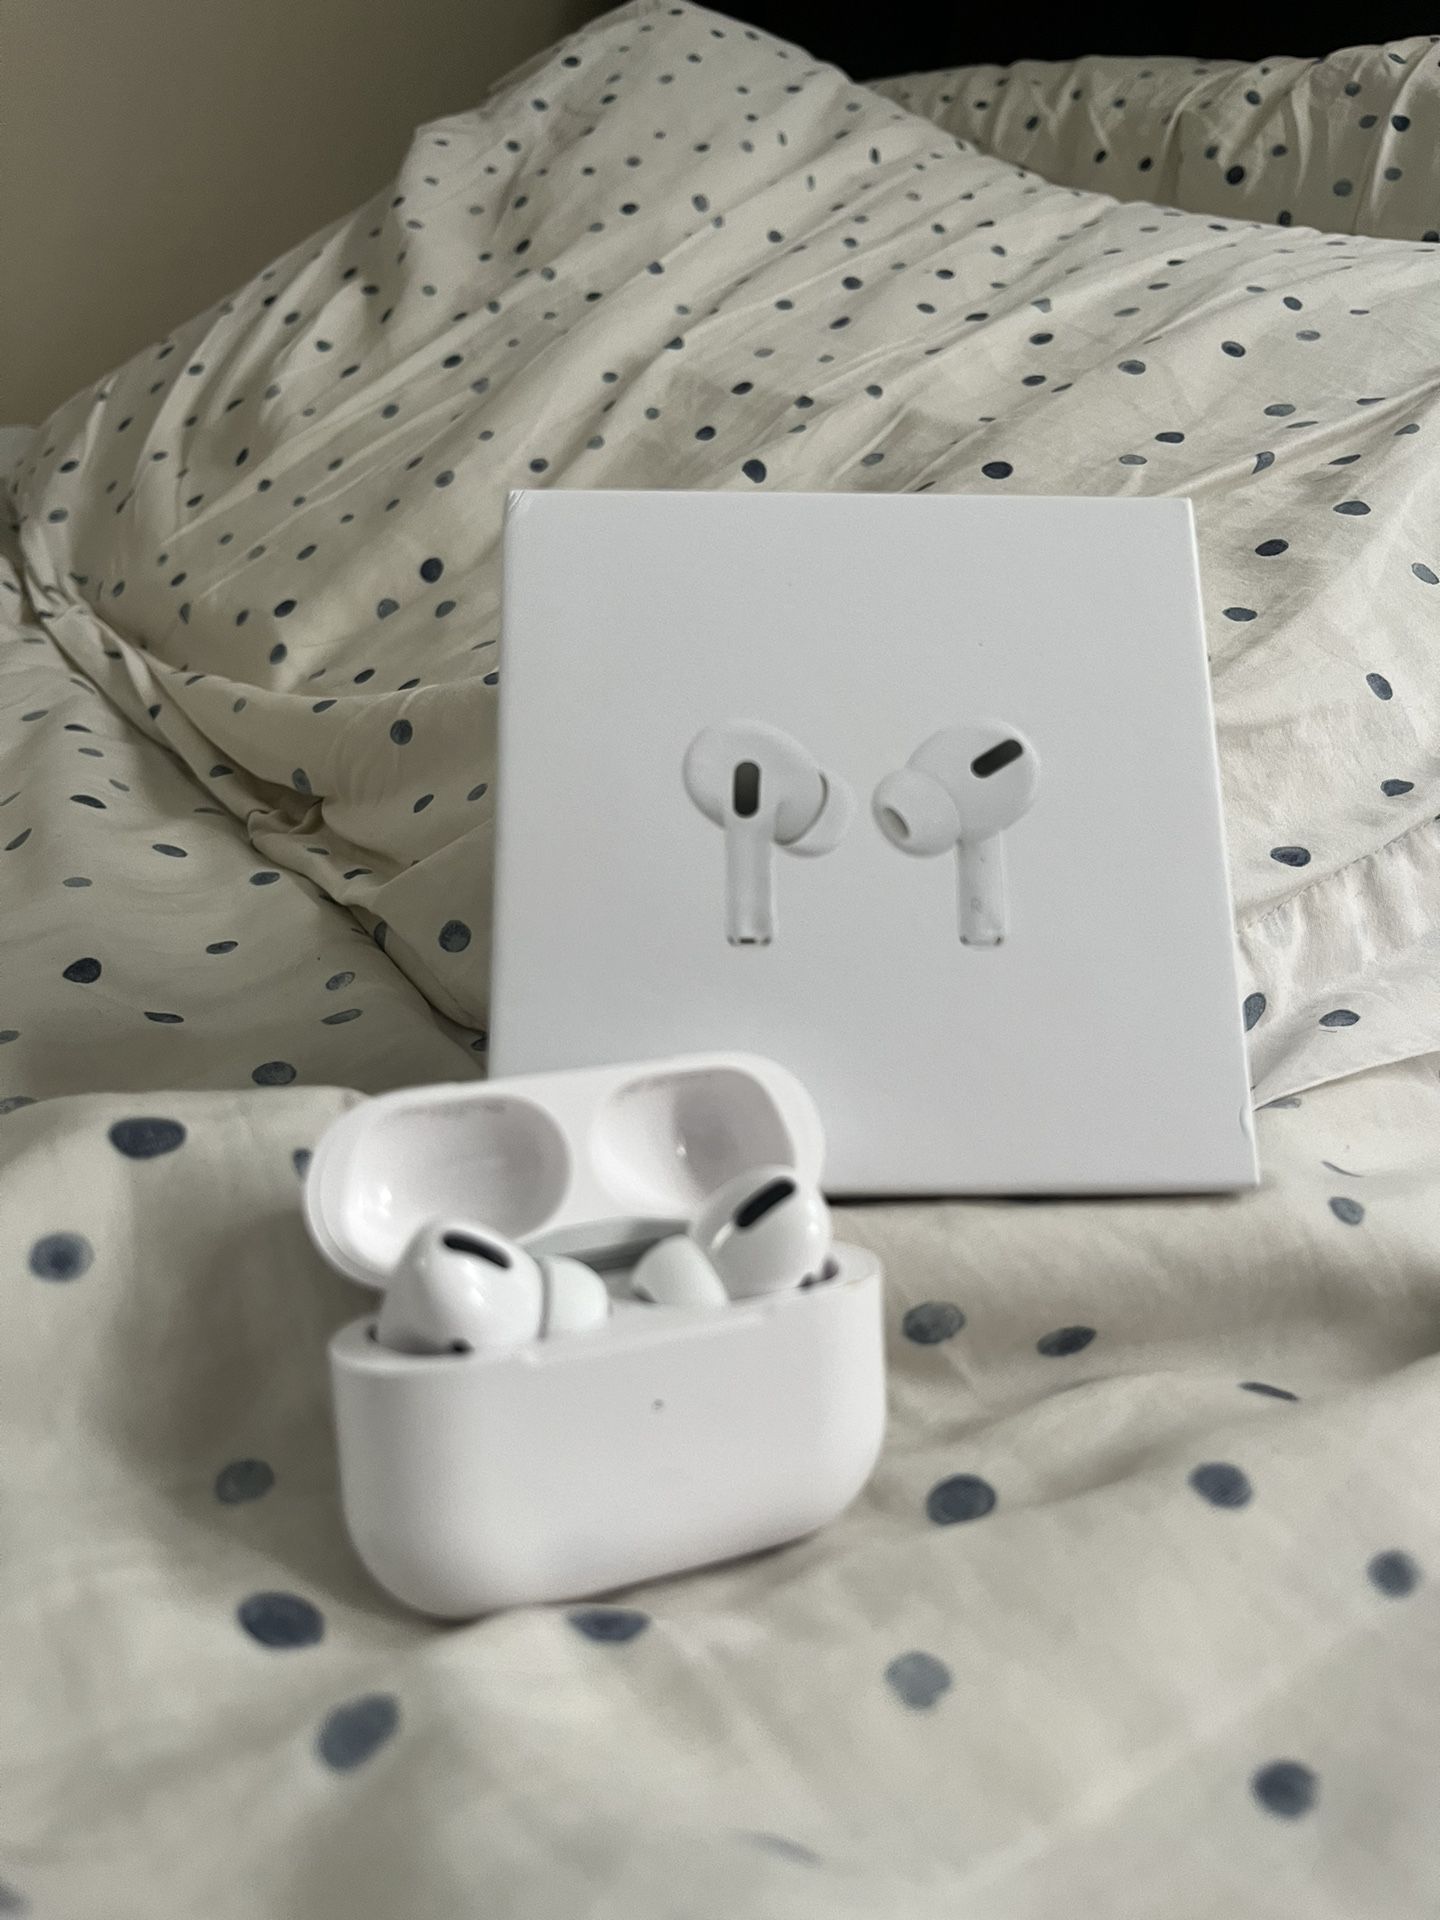 BEST OFFER Airpods Pros